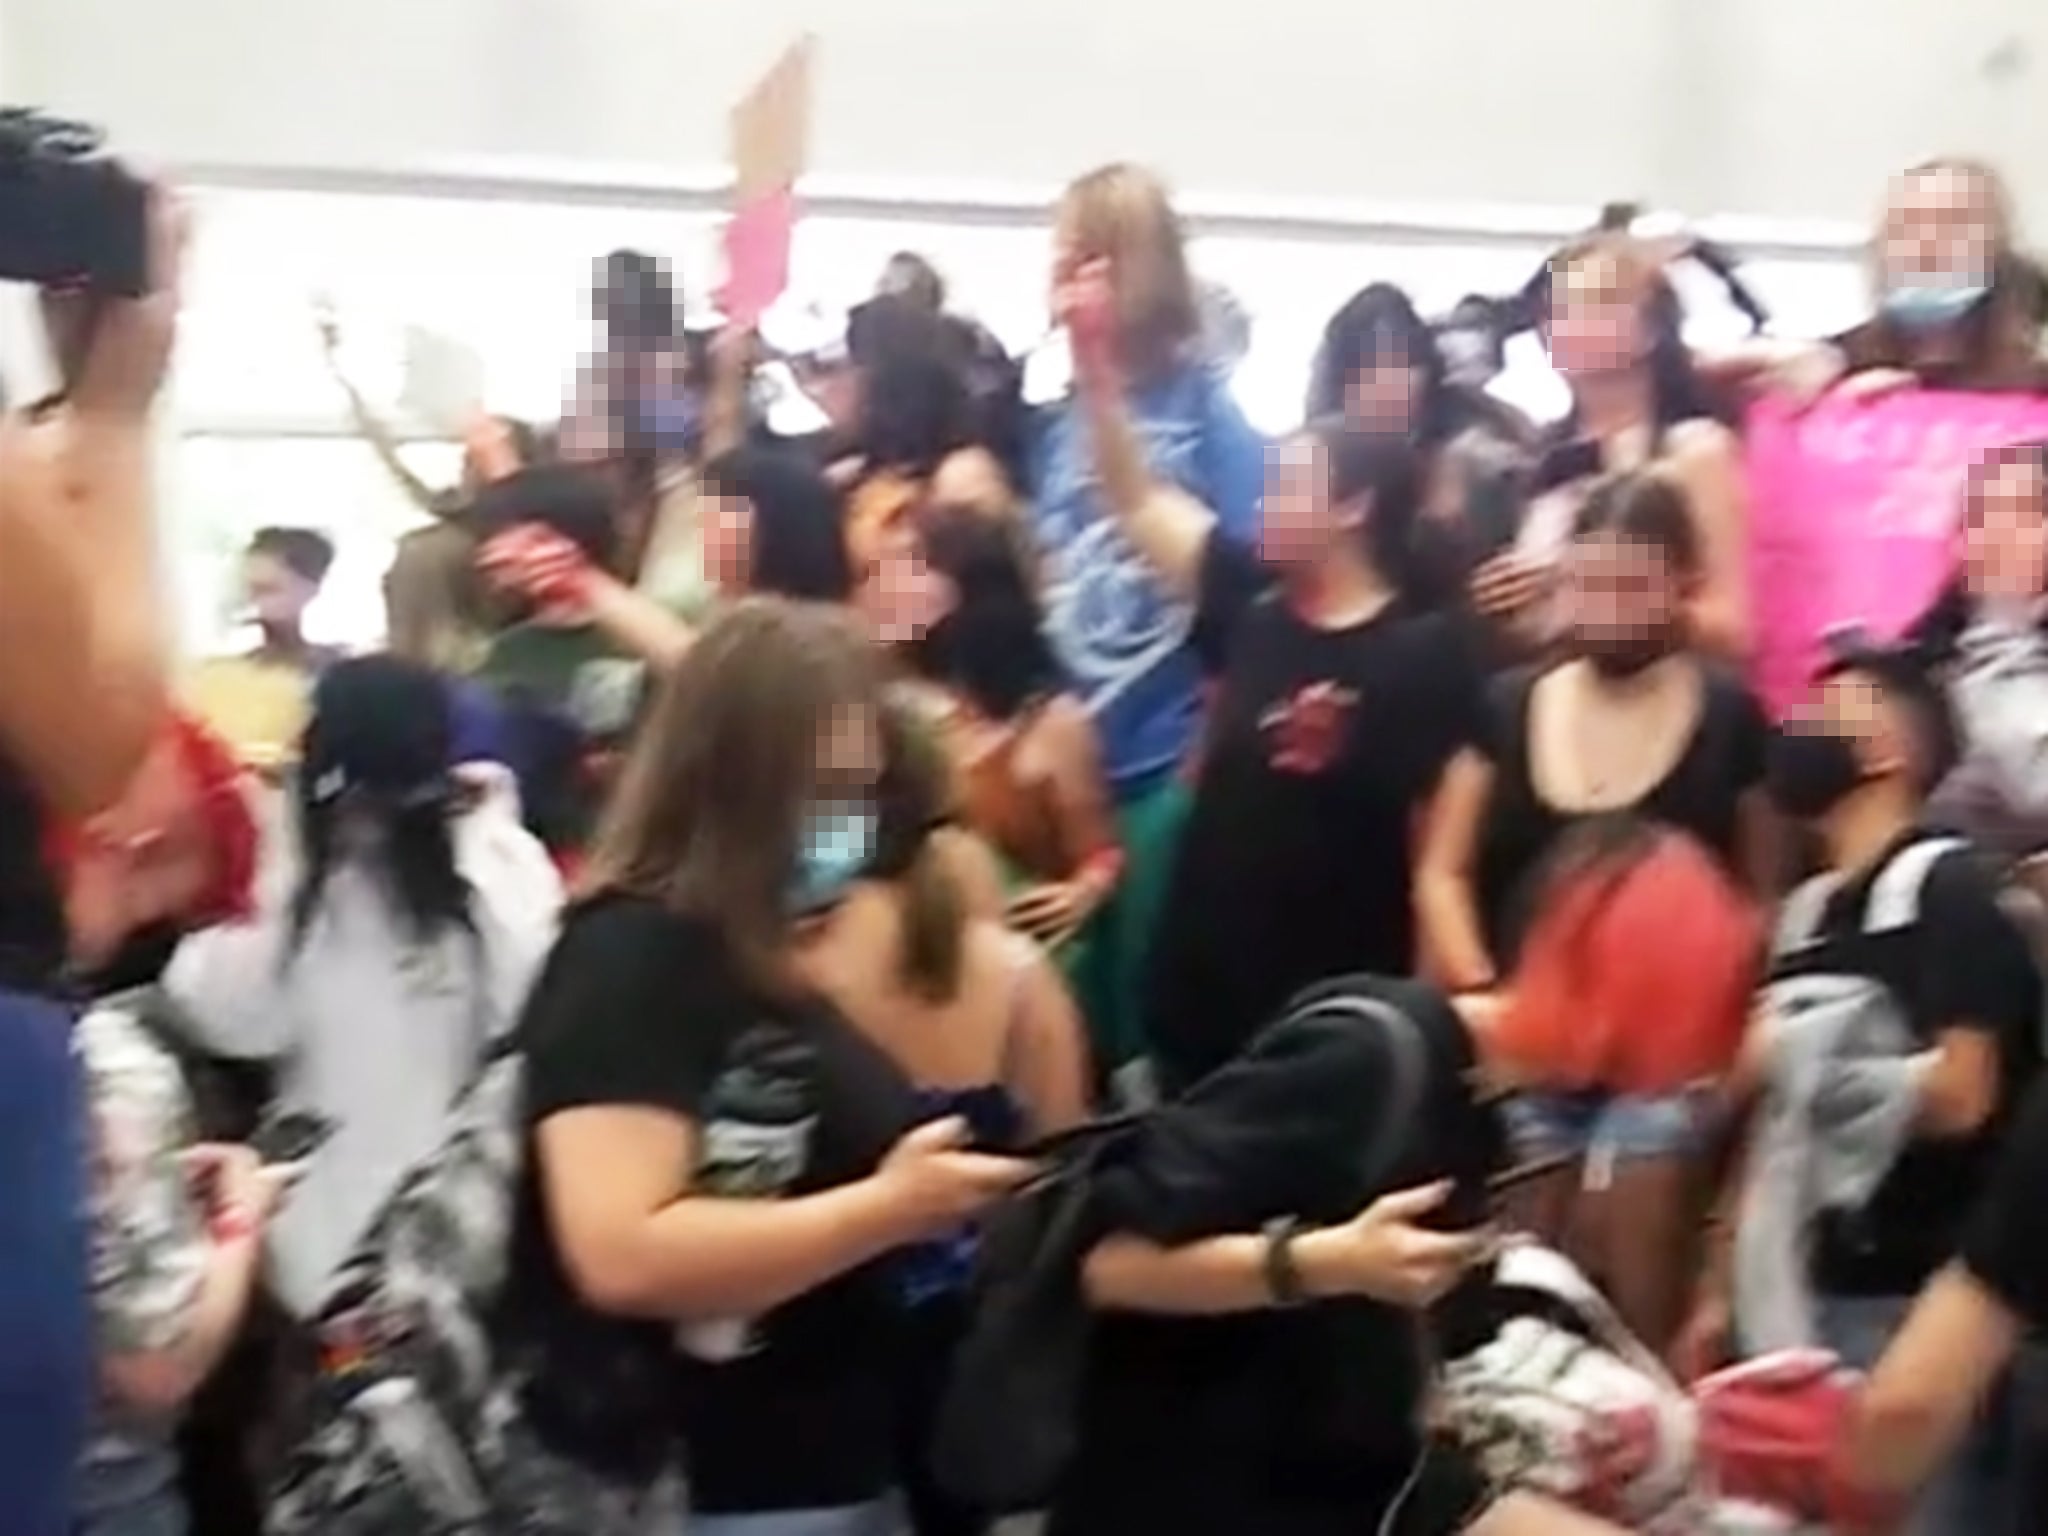 A TikTok video showing a protest at a high school in Arizona